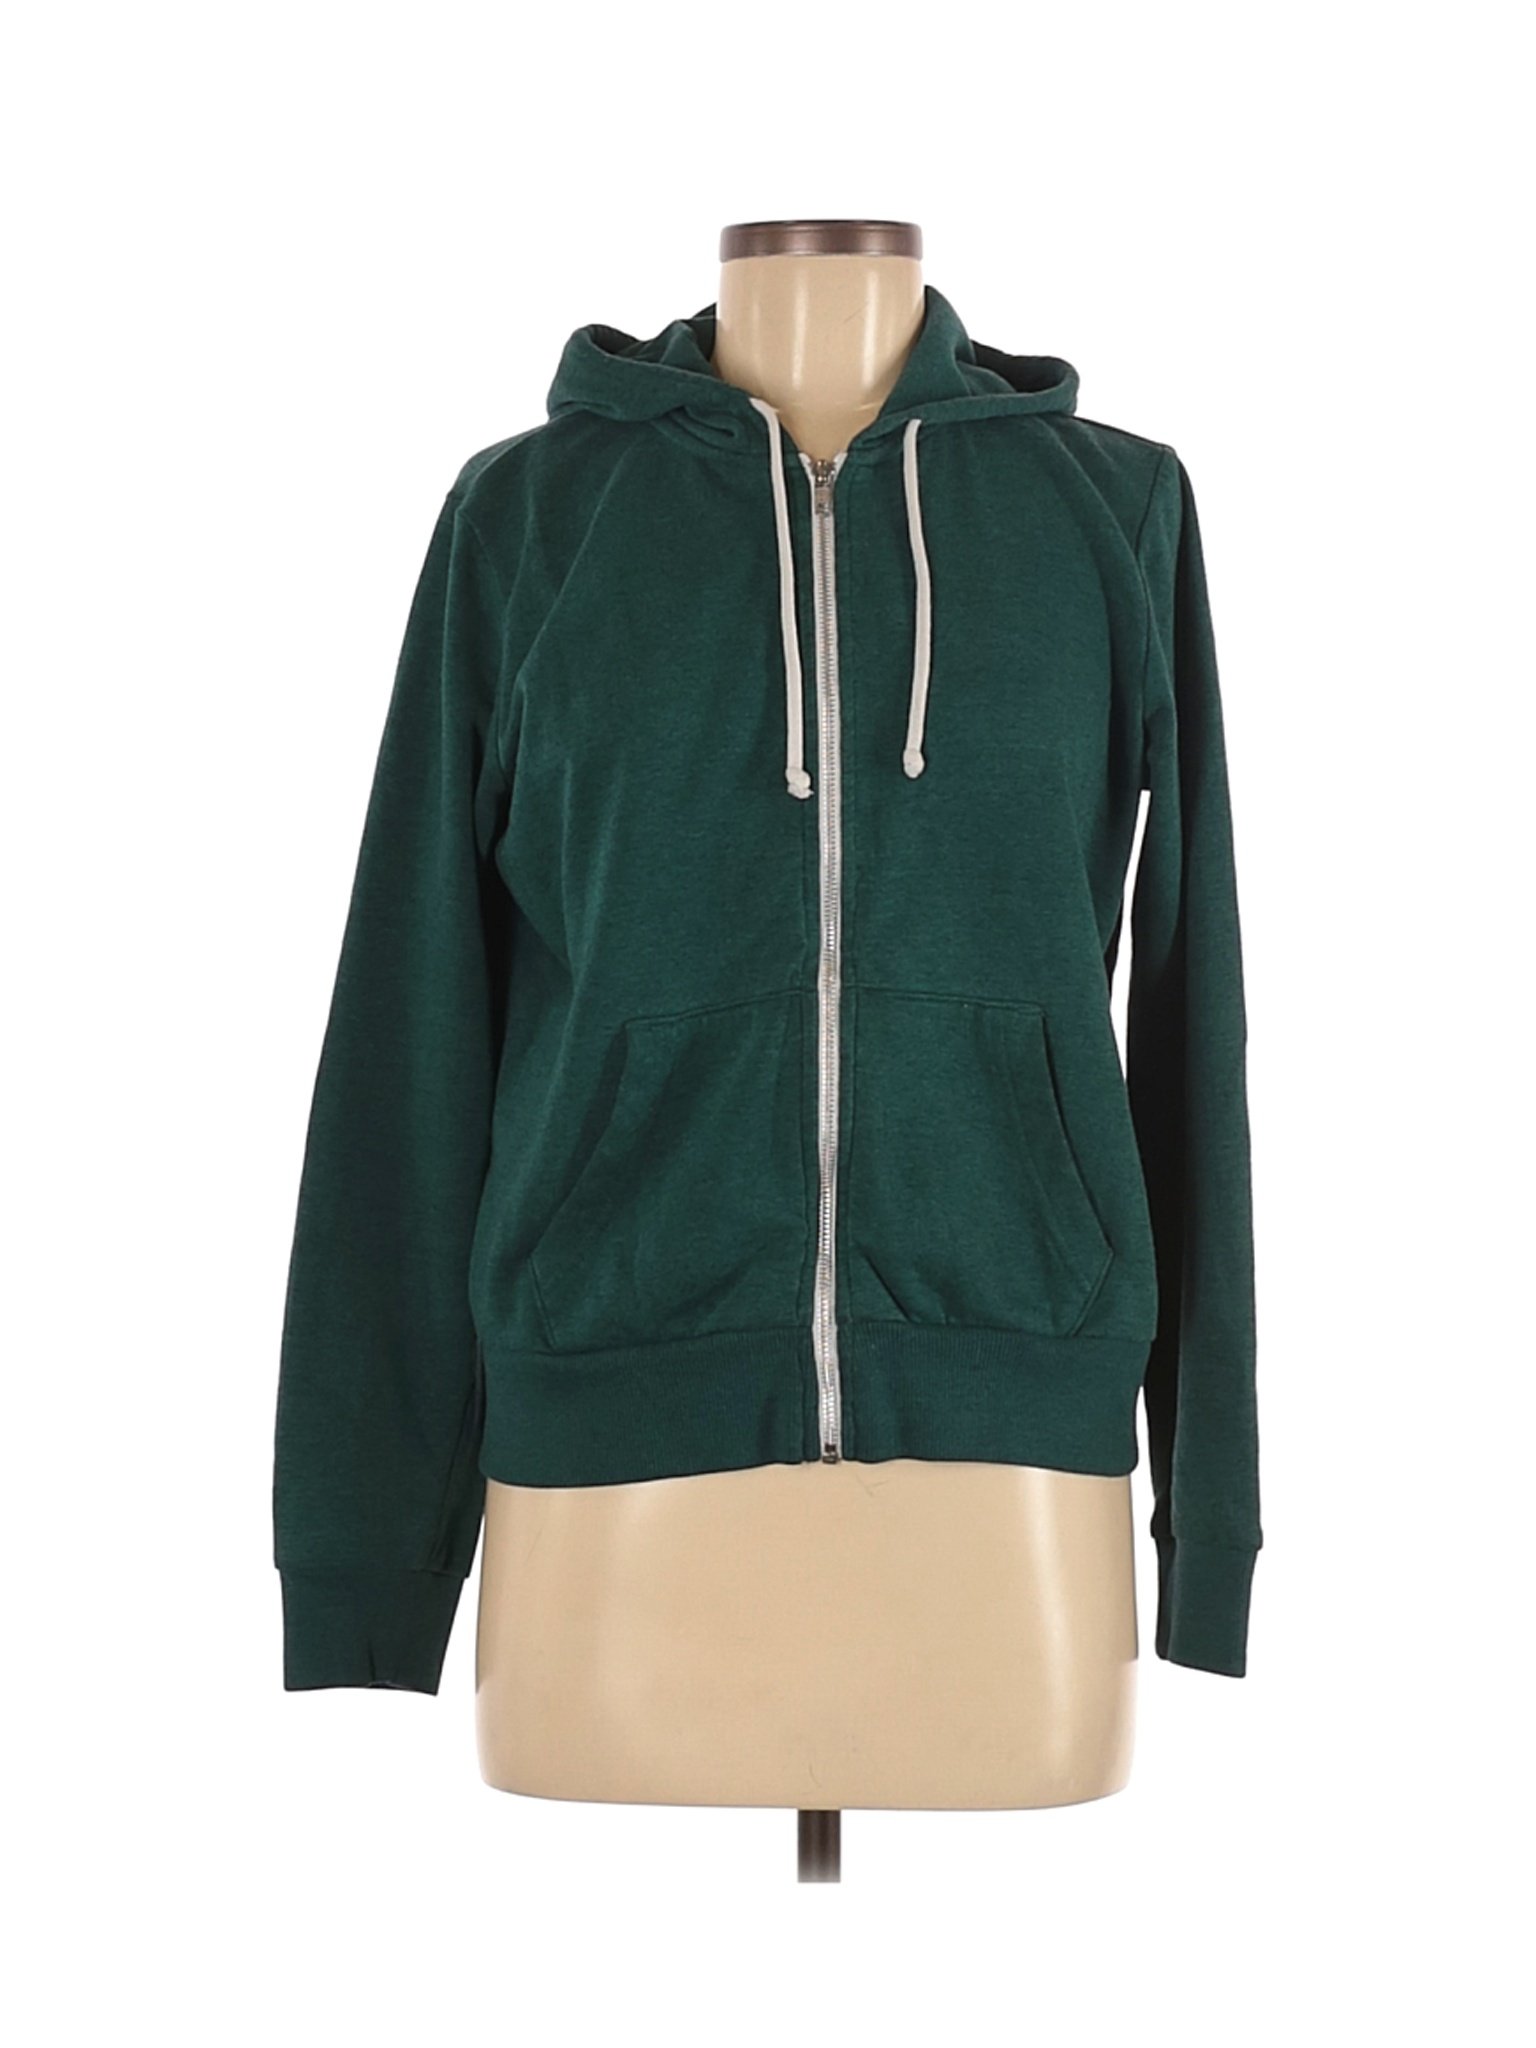 Divided by H&M Women Green Zip Up Hoodie S | eBay